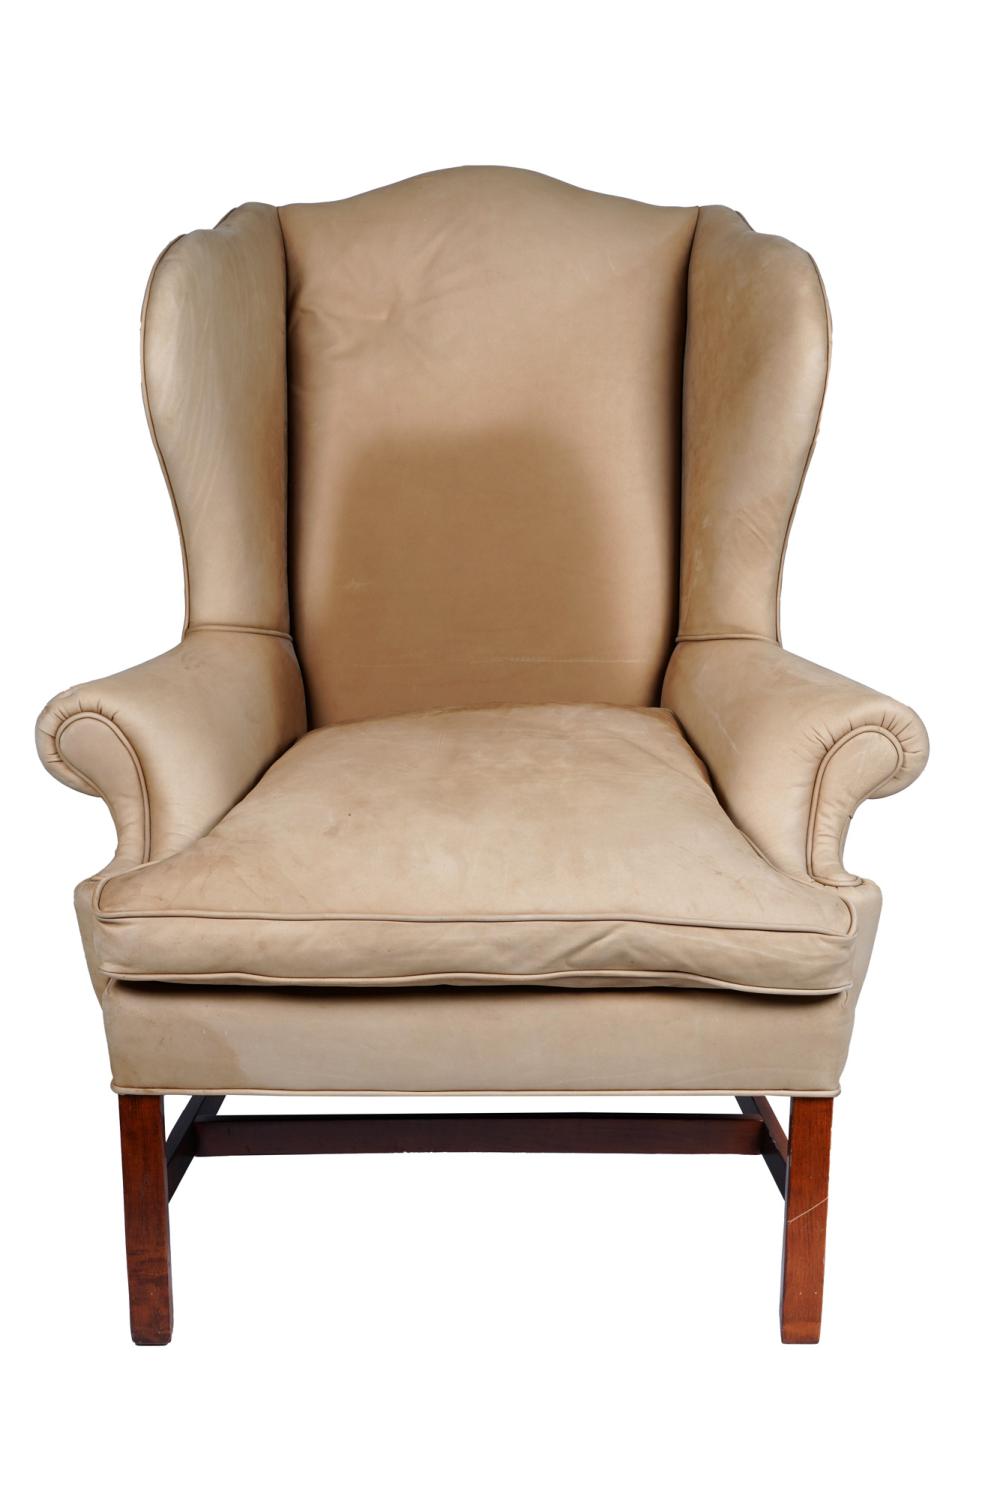 RALPH LAUREN LEATHER UPHOLSTERED 335e2a